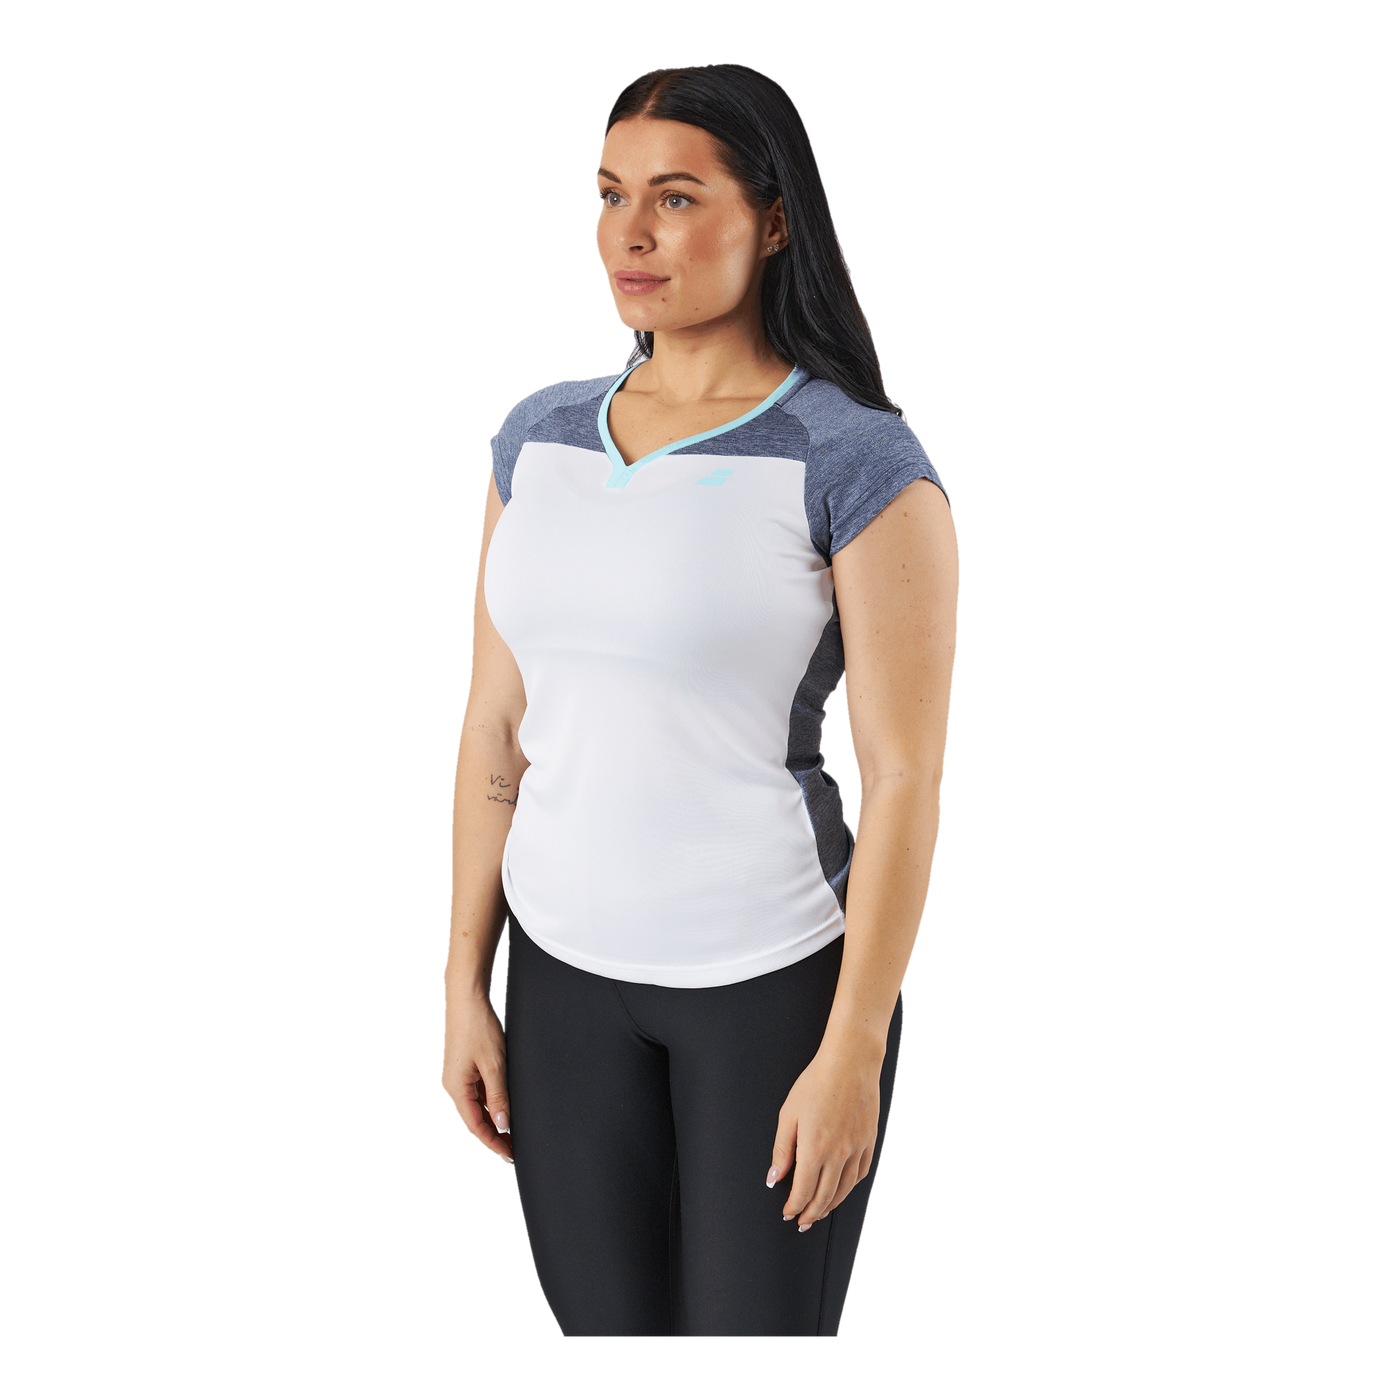 babolat cap sleeve top play white/blue